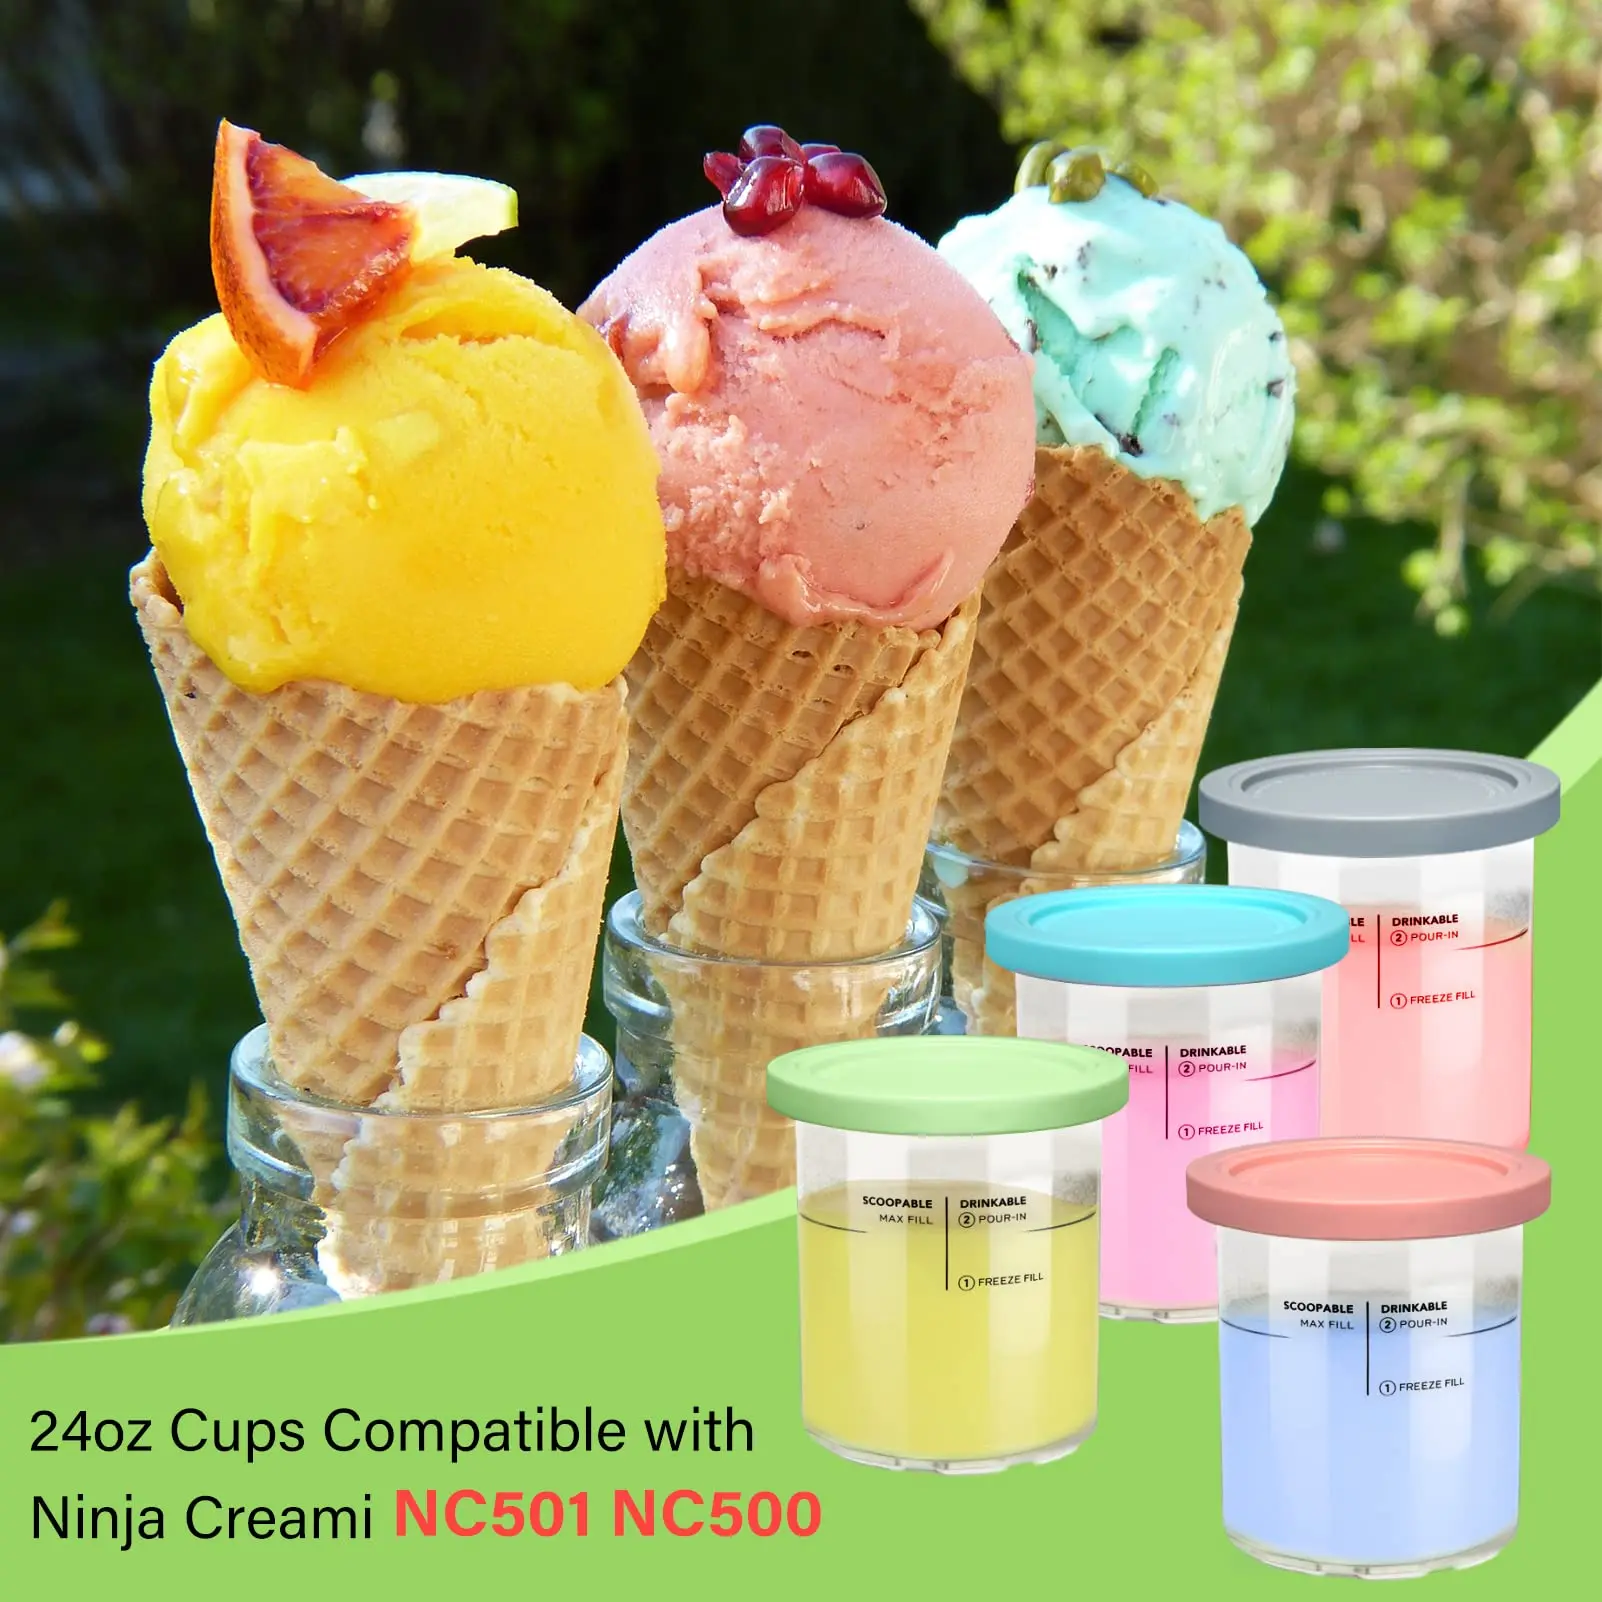 https://ae01.alicdn.com/kf/Sfc0d07200aaa41028e9b3826501f189ez/4-Pack-Containers-Replacement-Ice-Cream-Maker-for-Ninja-Creami-Pints-and-Lids-eluxe-Compatible-with.jpg